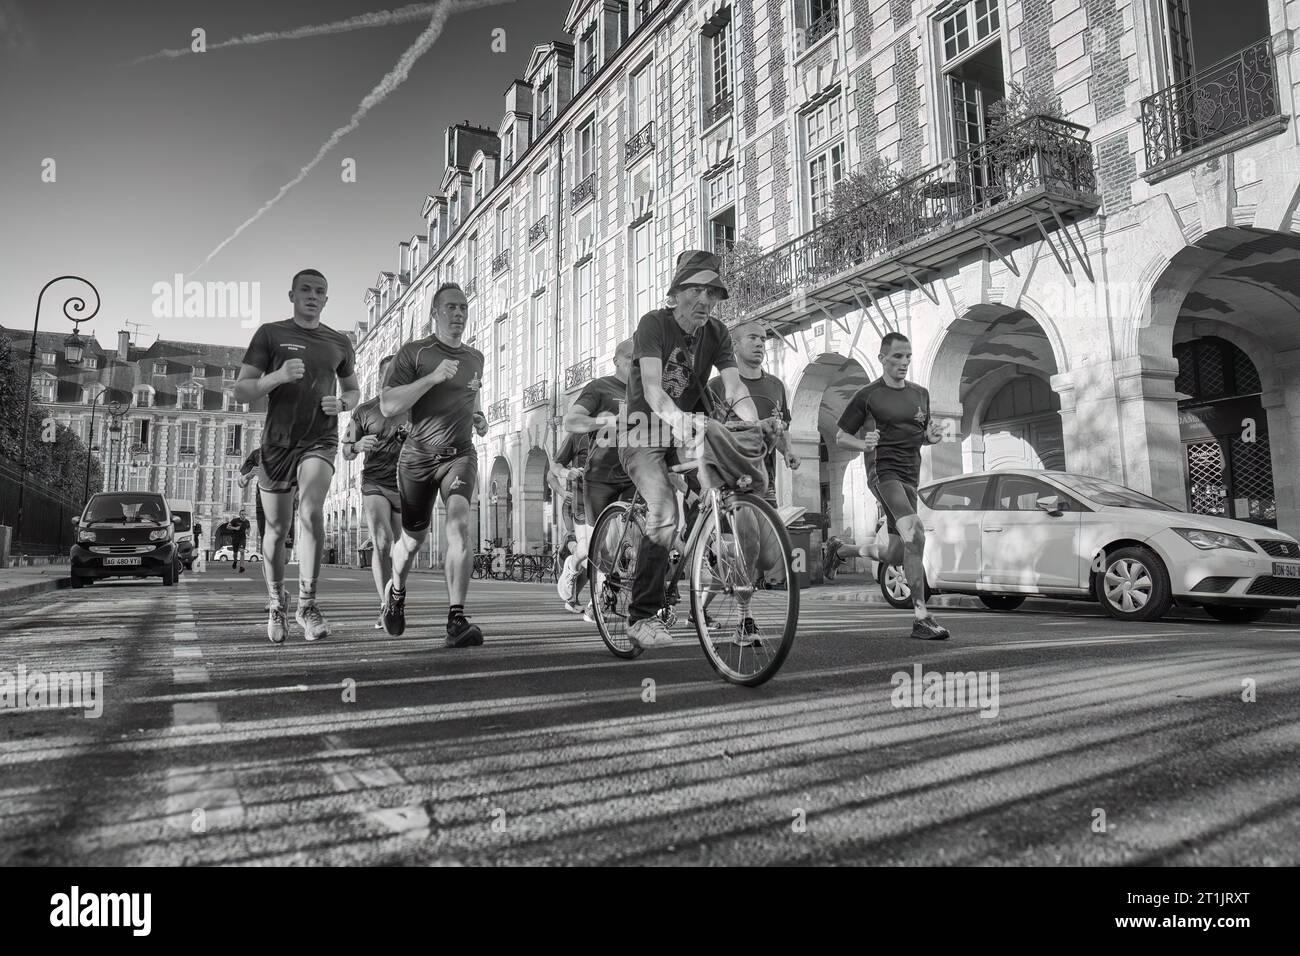 France Rugby team in warm-up, plus one bicyclist. Paris, France Stock Photo